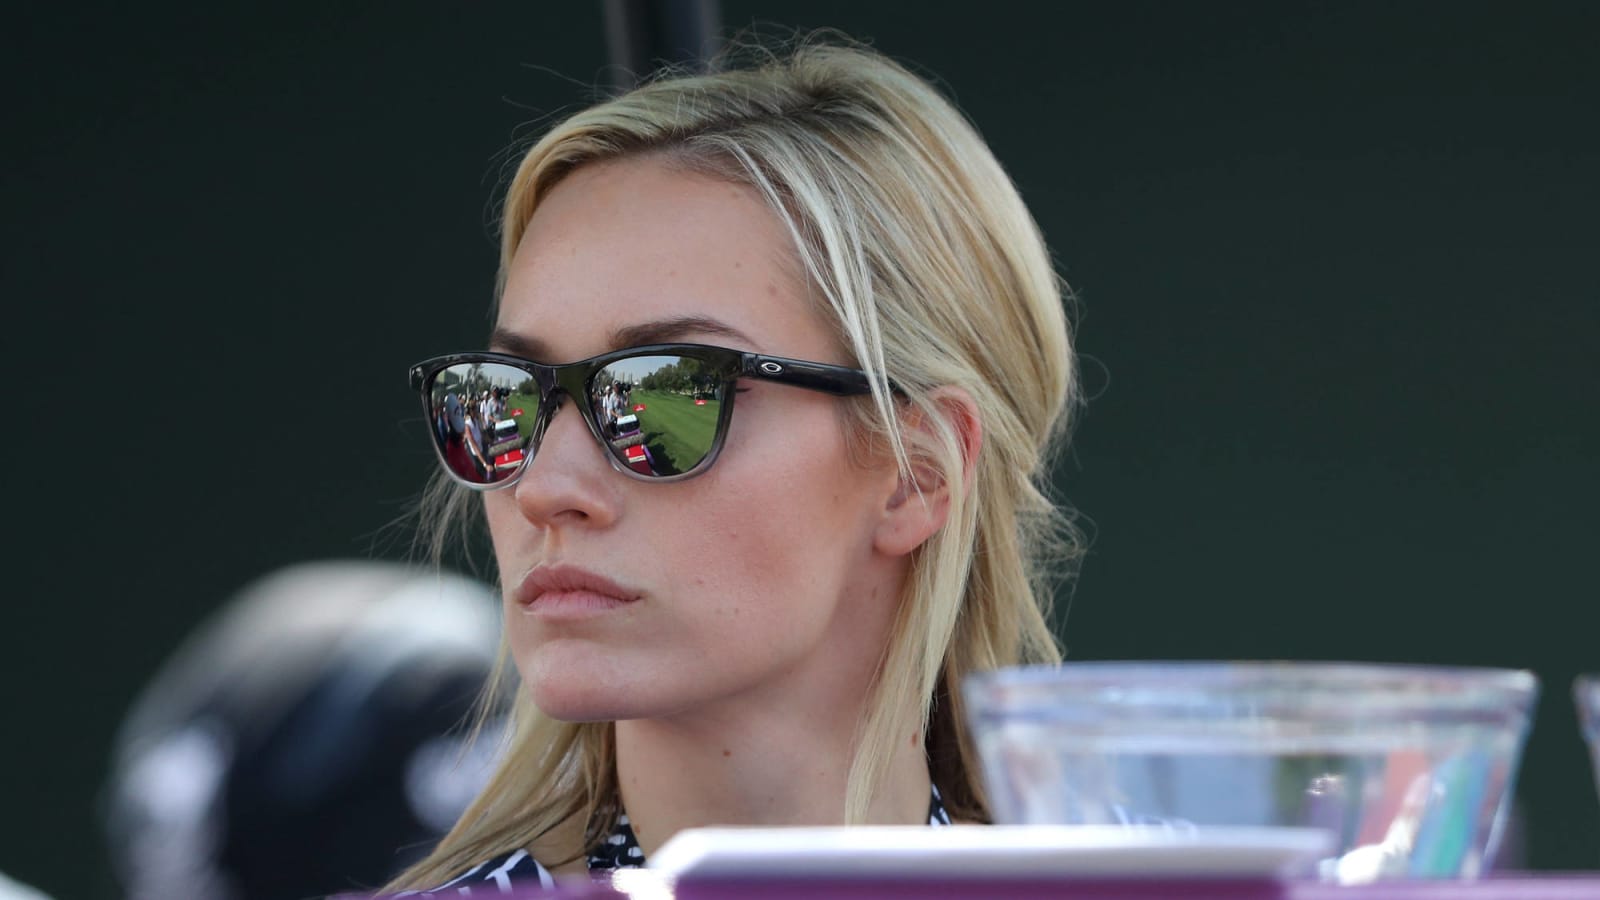 Golfer Paige Spiranac received death threats over appearance